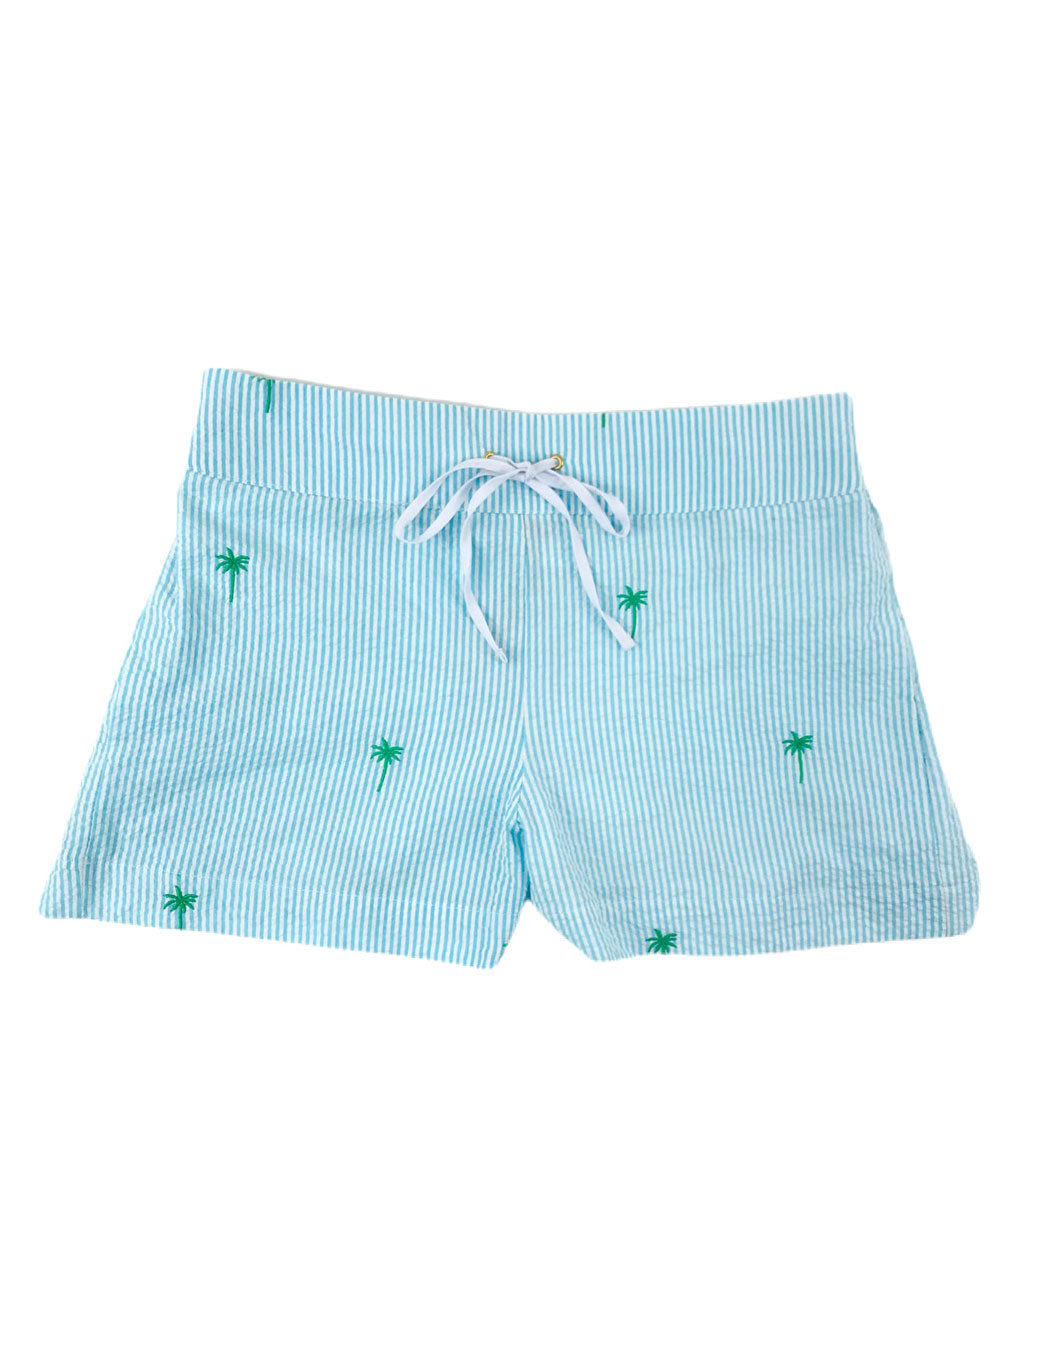 Turquoise Seersucker Women's Lounge Short with Green Embroidered Palm Trees